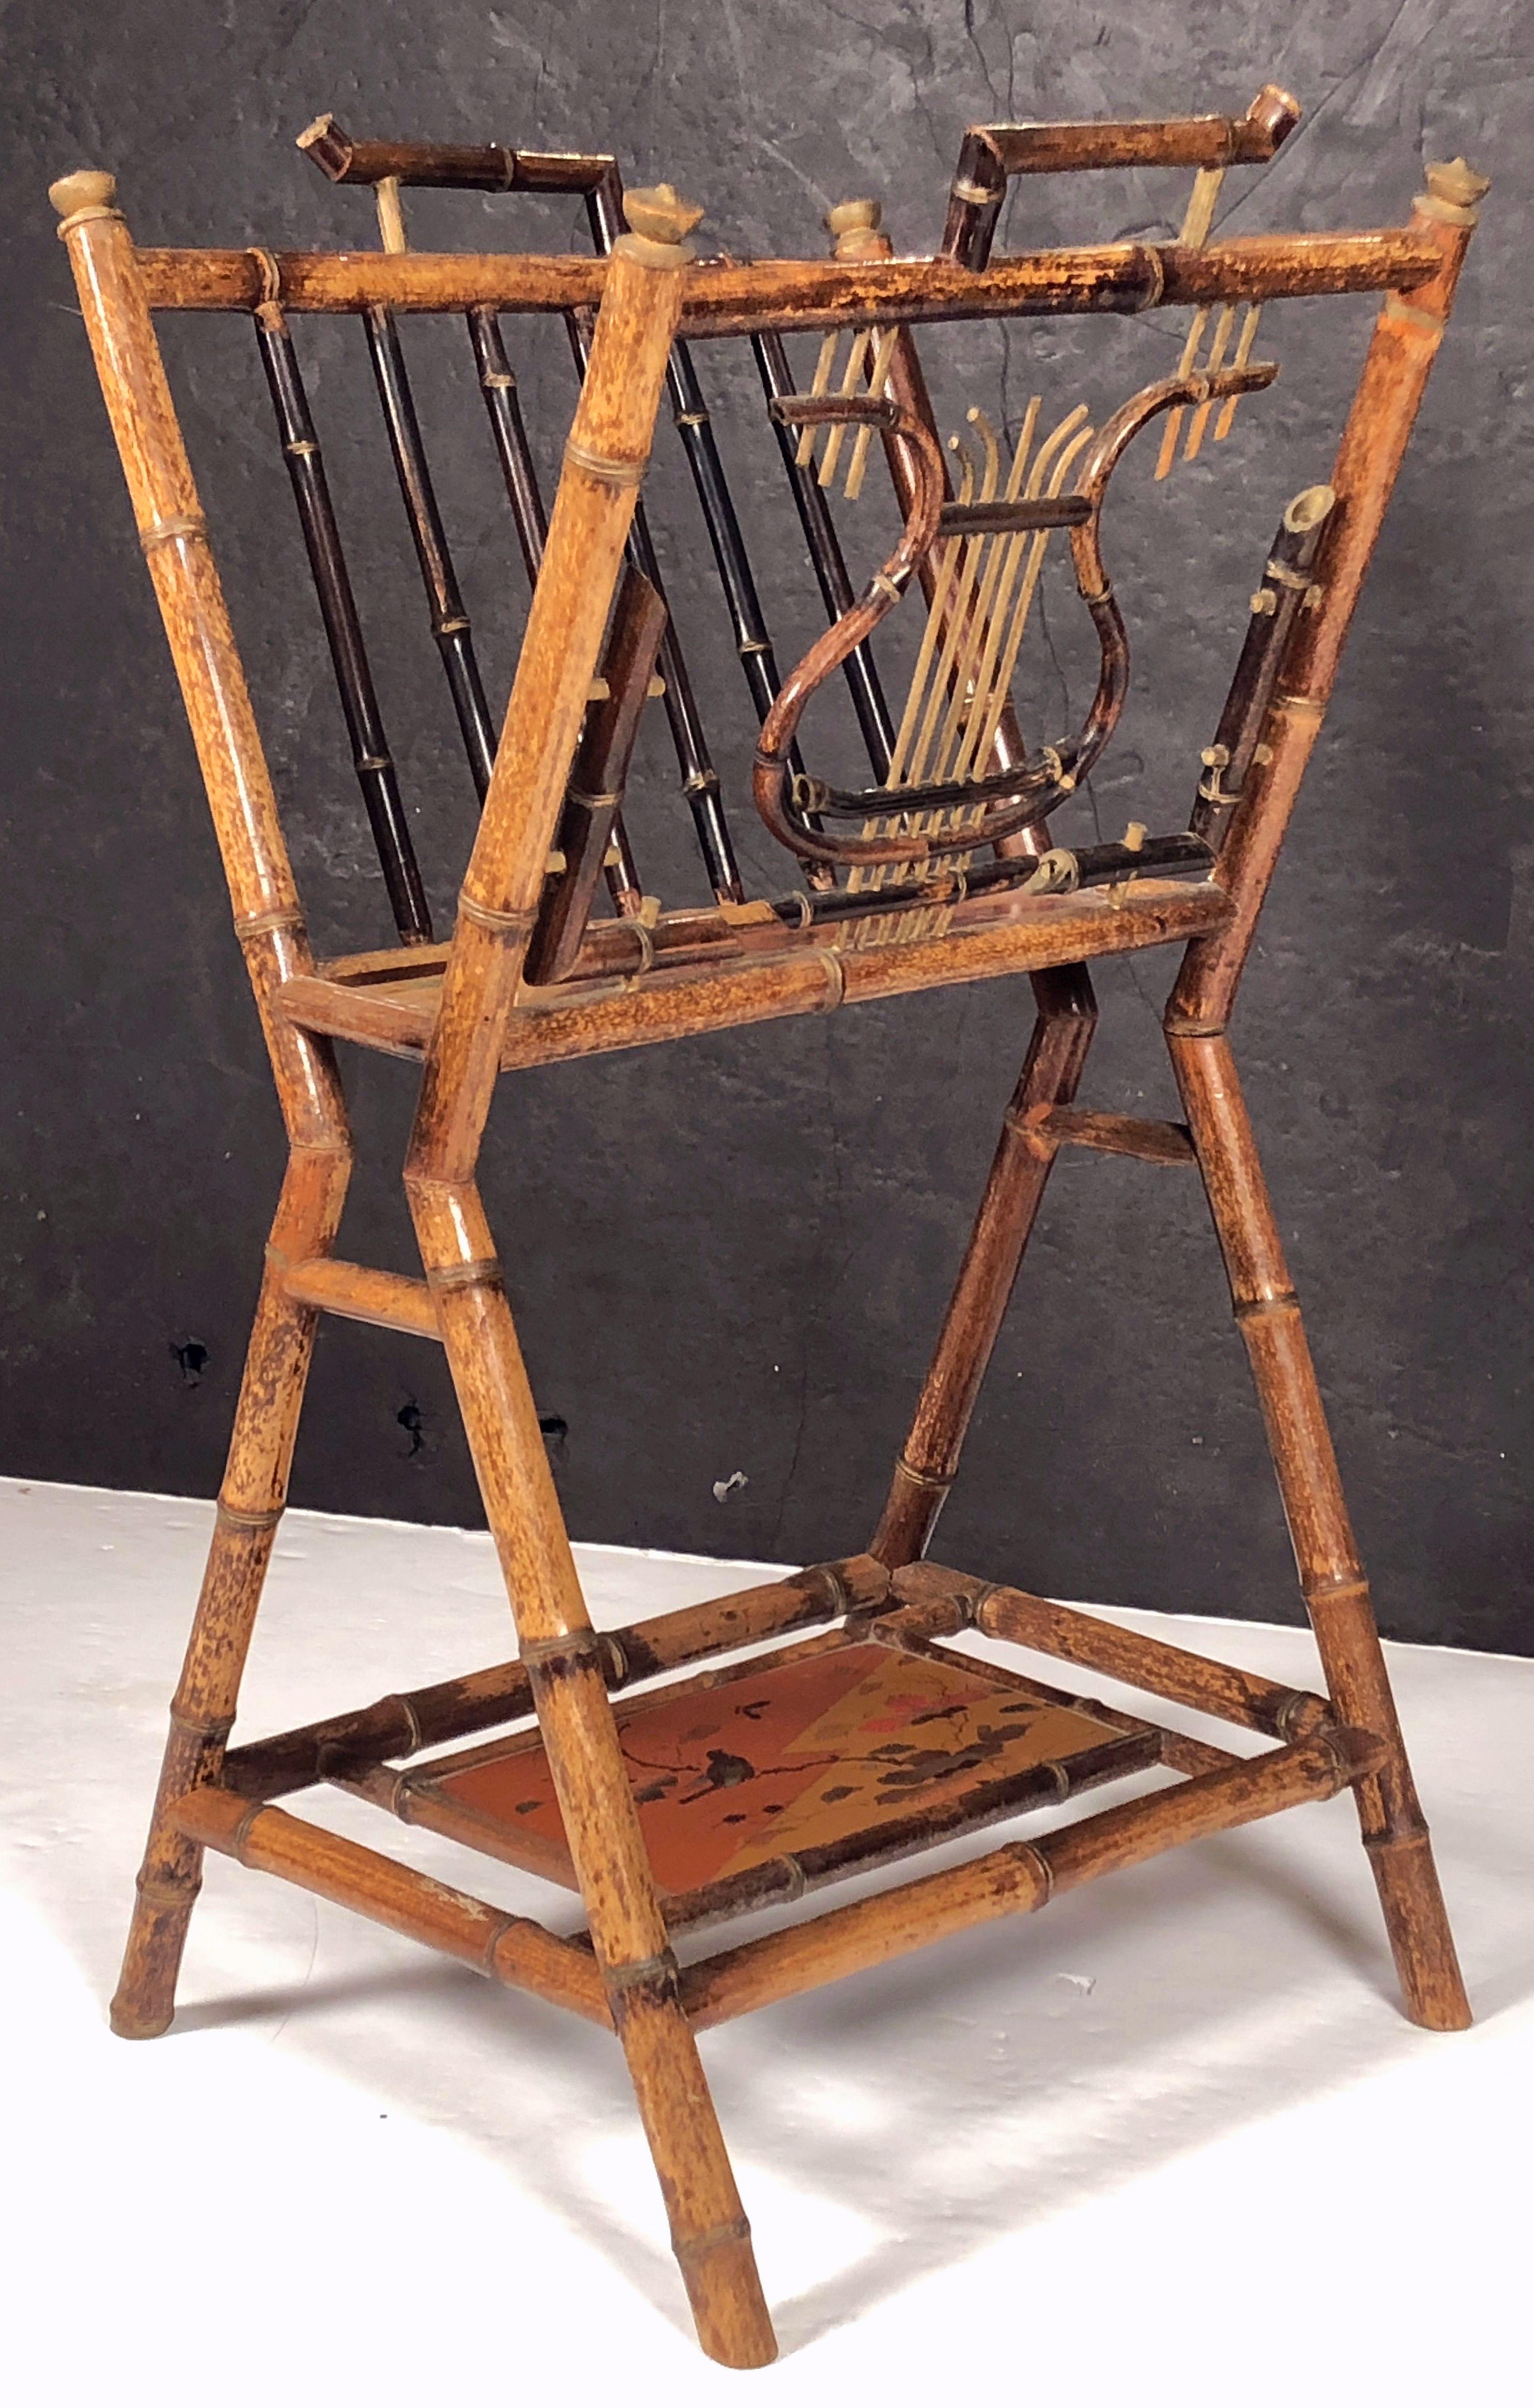 A fine English bamboo Canterbury music stand or magazine rack featuring a bamboo stand with a lyre design in bamboo, with lacquered chinoisierie panel under-tier and stretcher base, and decorative caps.